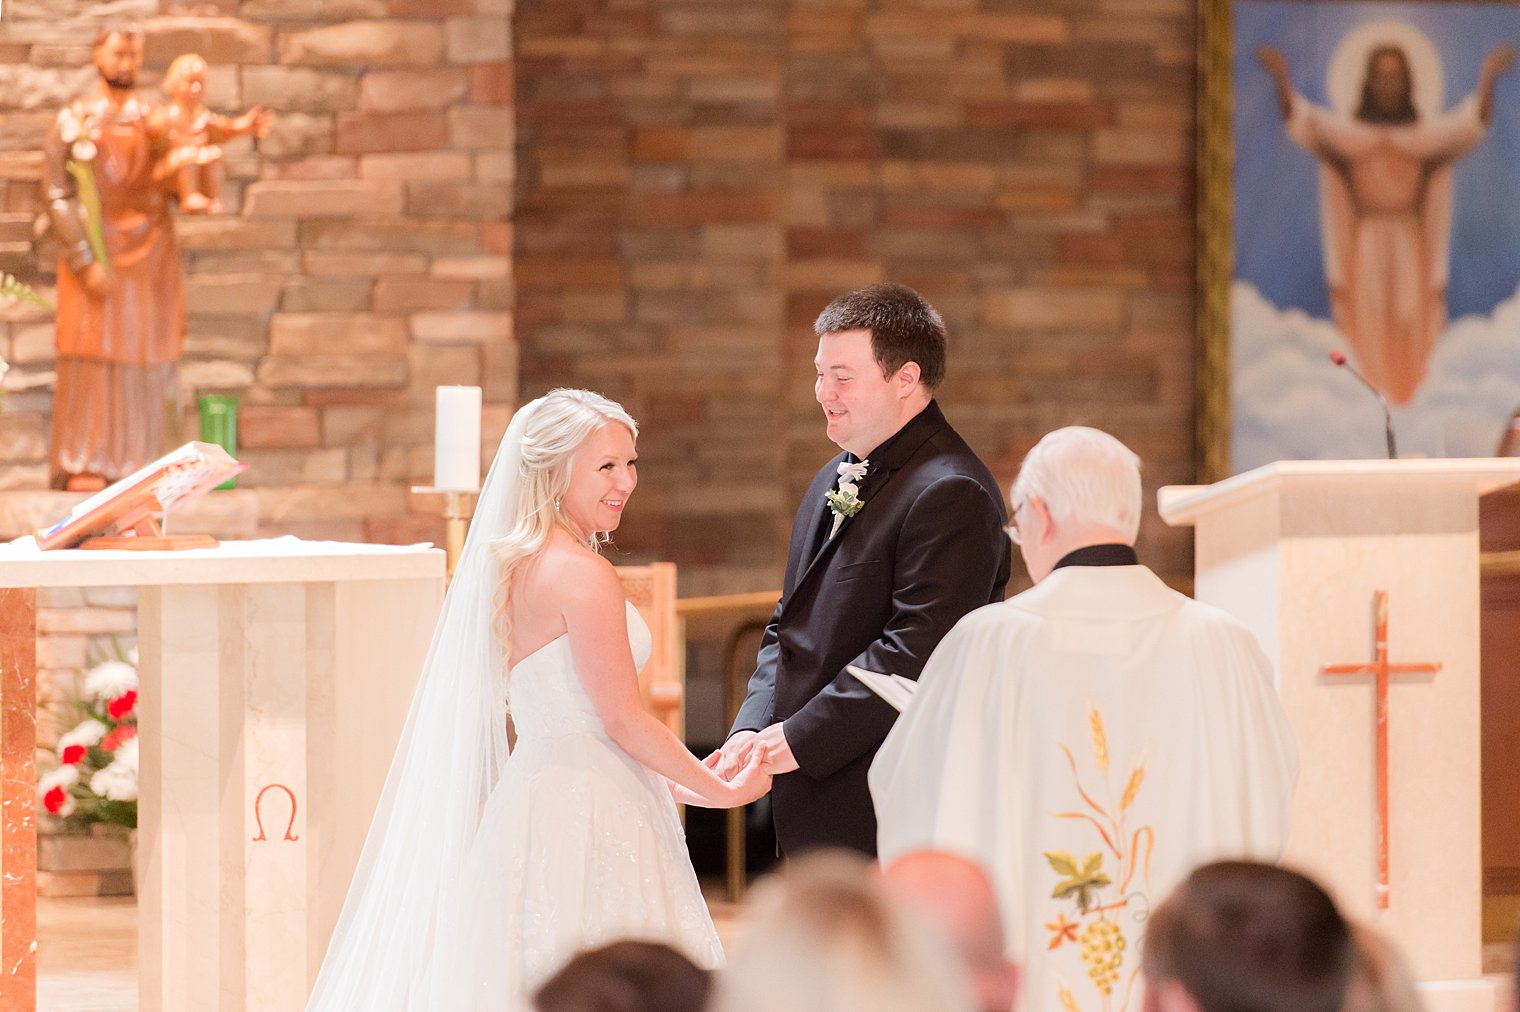 married couple holds hands together during ceremony in church